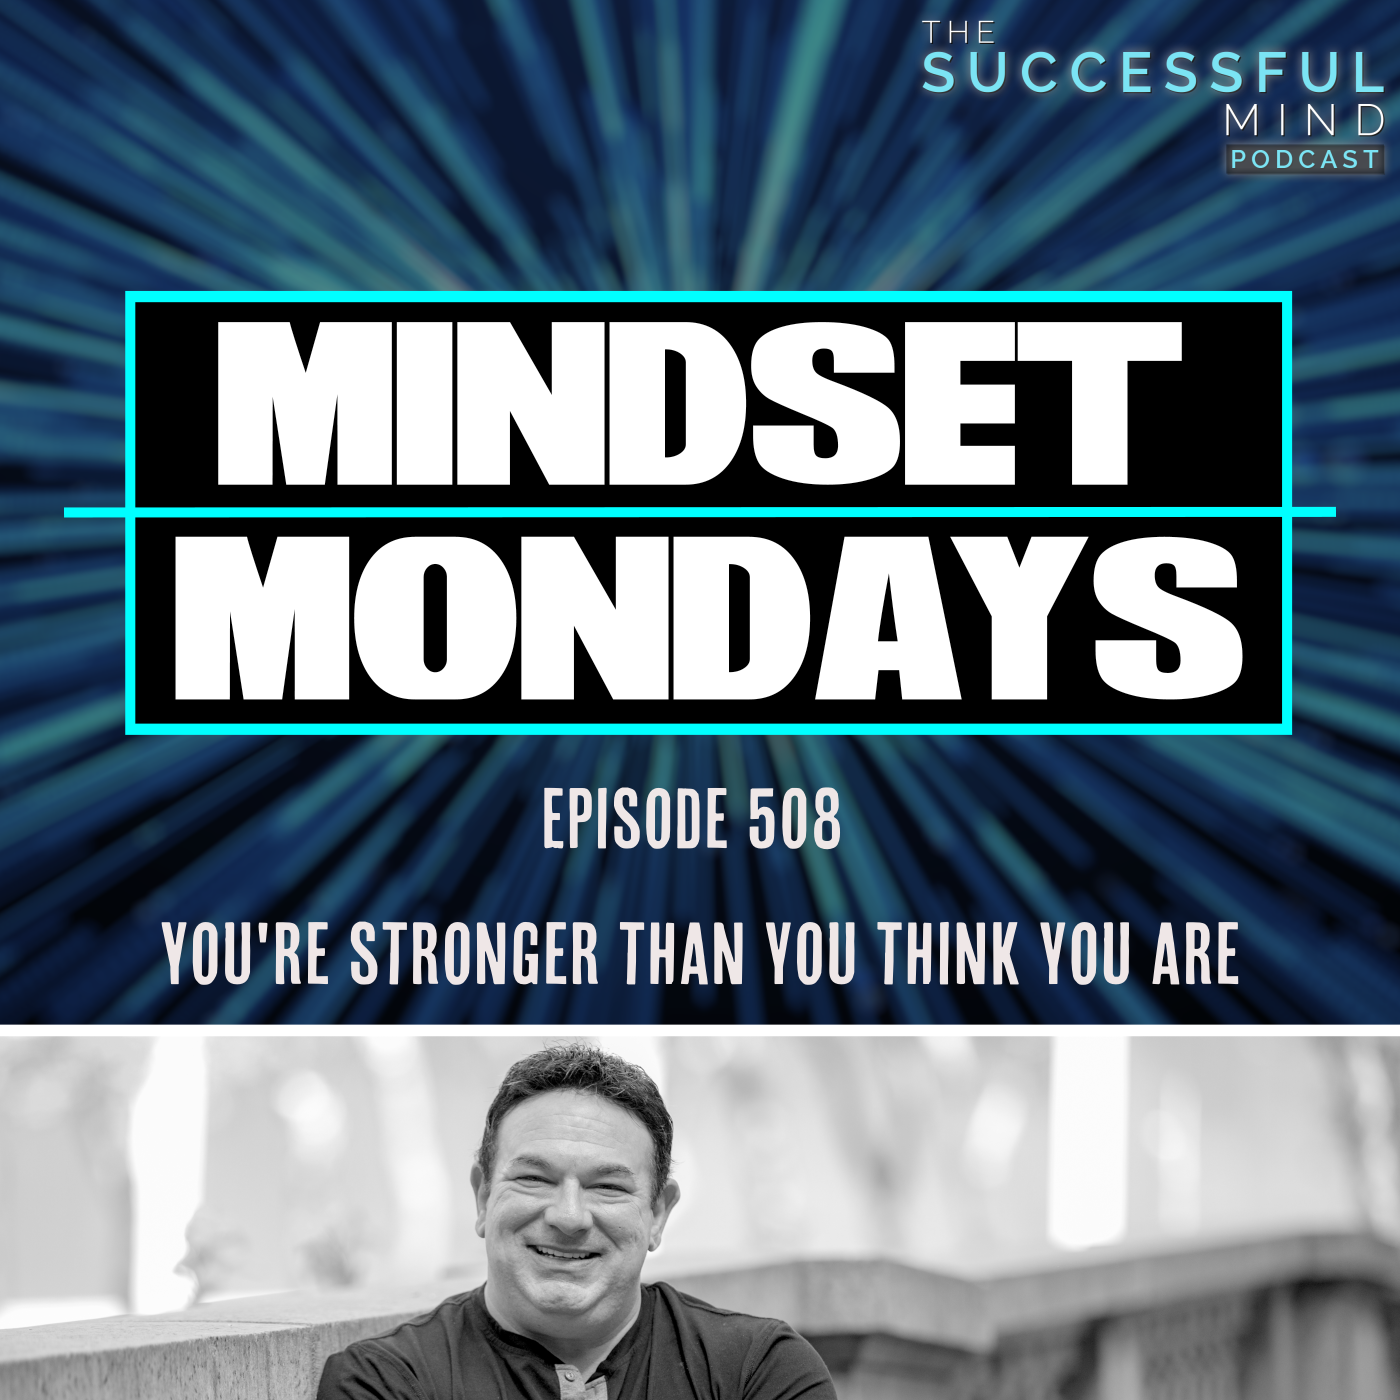 The Successful Mind Podcast - Episode 508 - You're Stronger Than You Think You Are